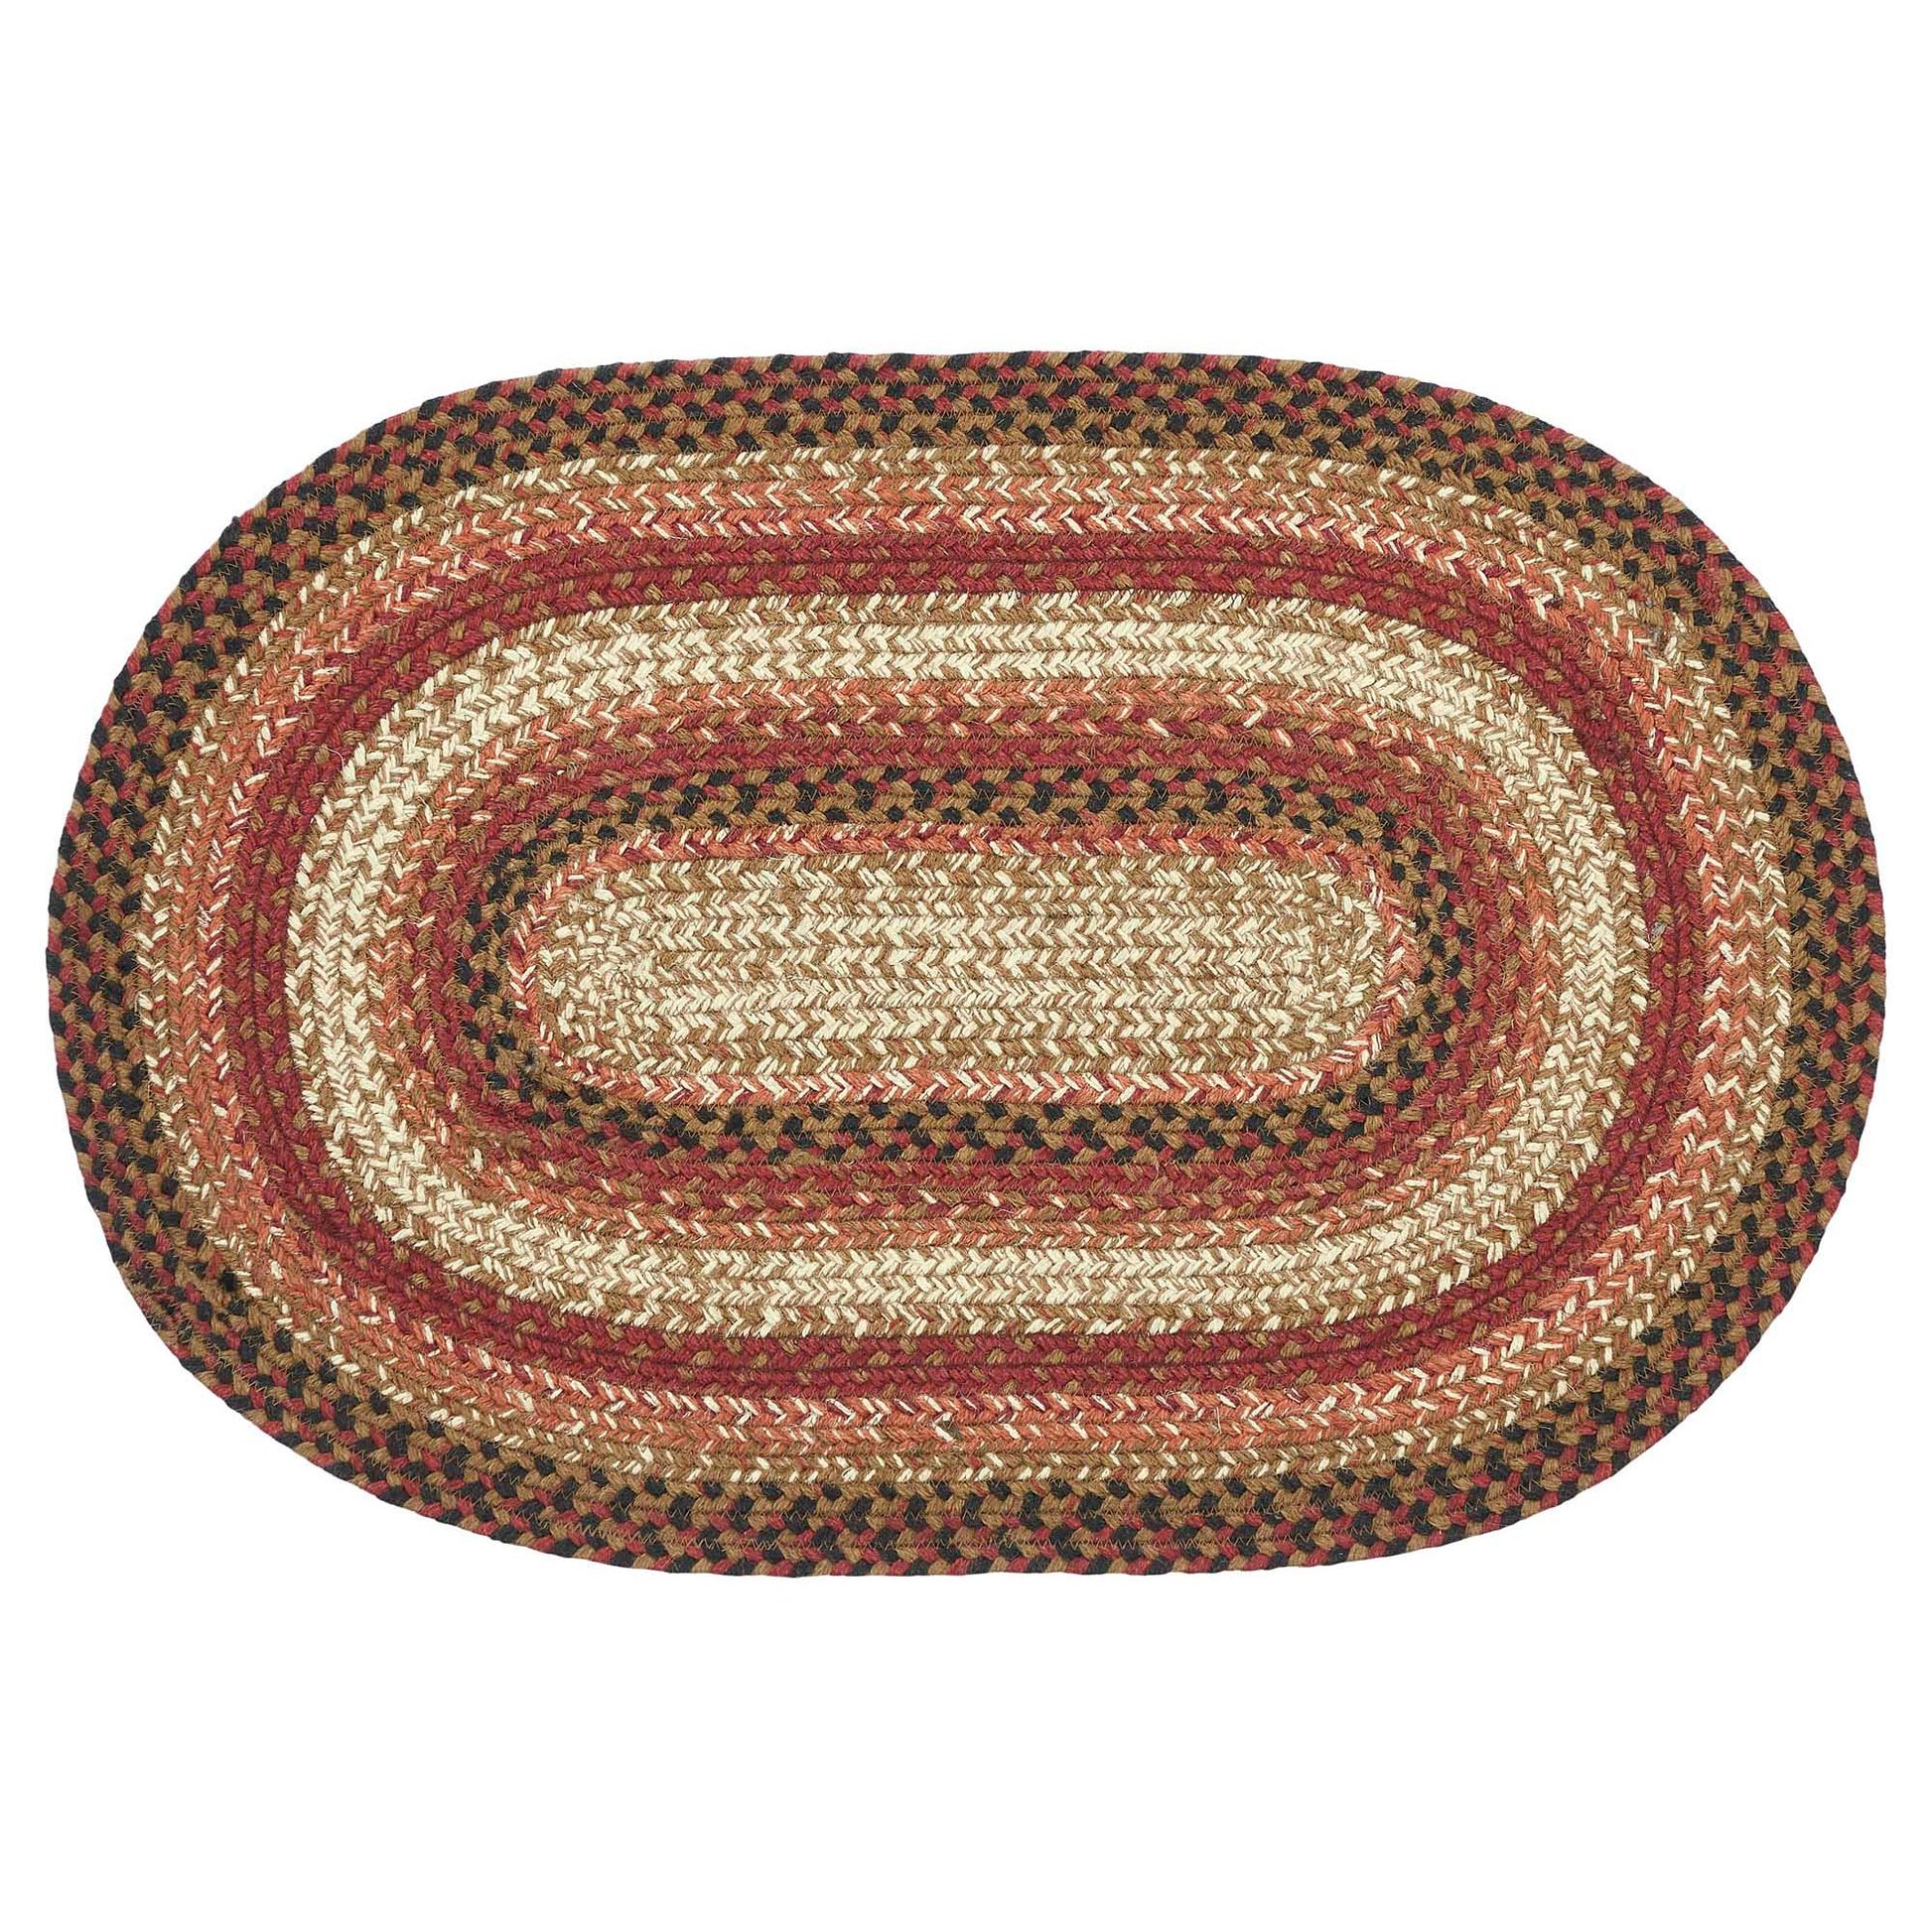 67110-Ginger-Spice-Jute-Rug-Oval-w-Pad-20x30-image-6